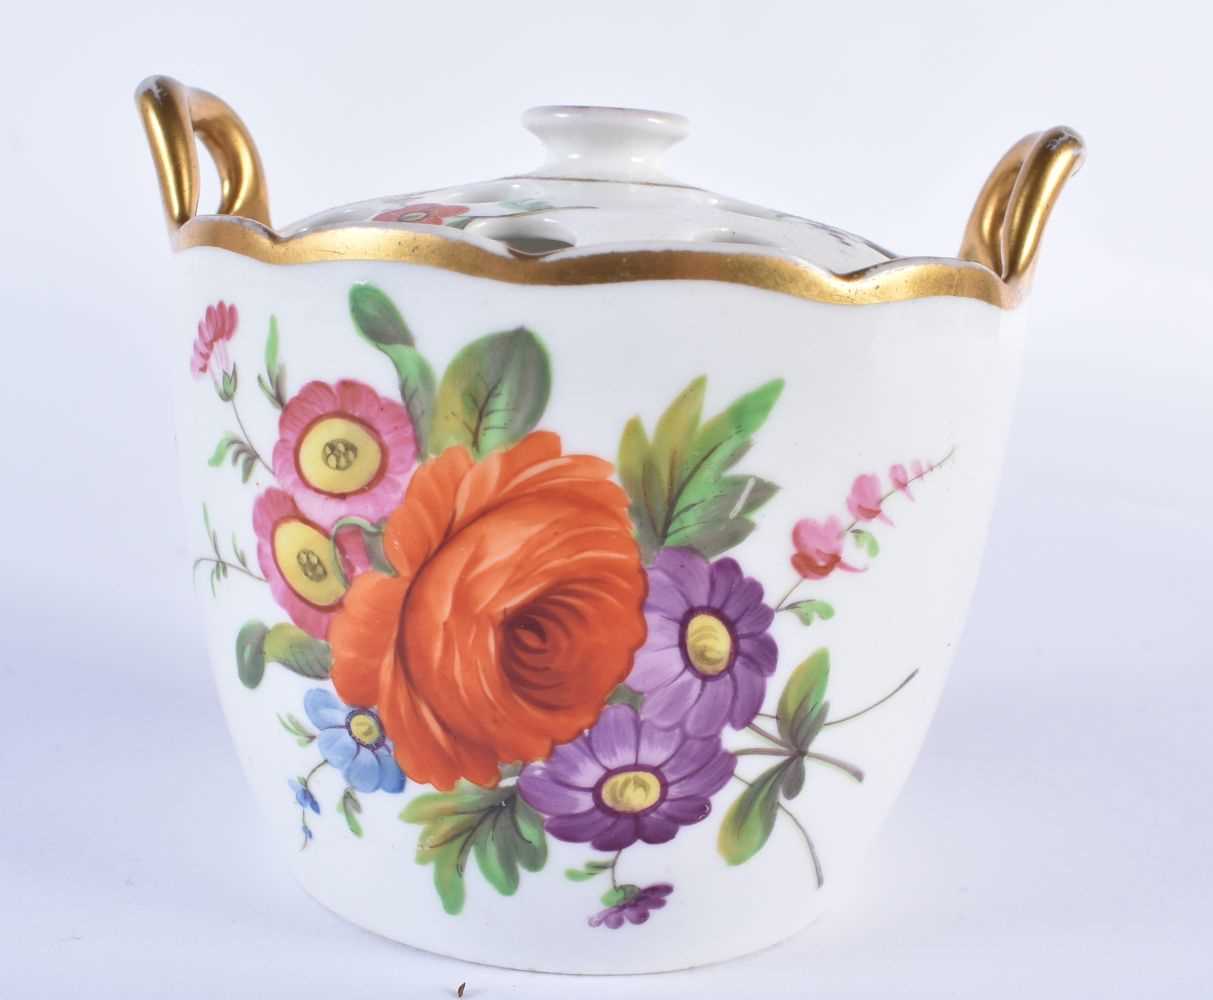 Wedgwood rare bone china pot pourri and cover painted with flowers, marked WEDGWOOD. 7 x 8 cm